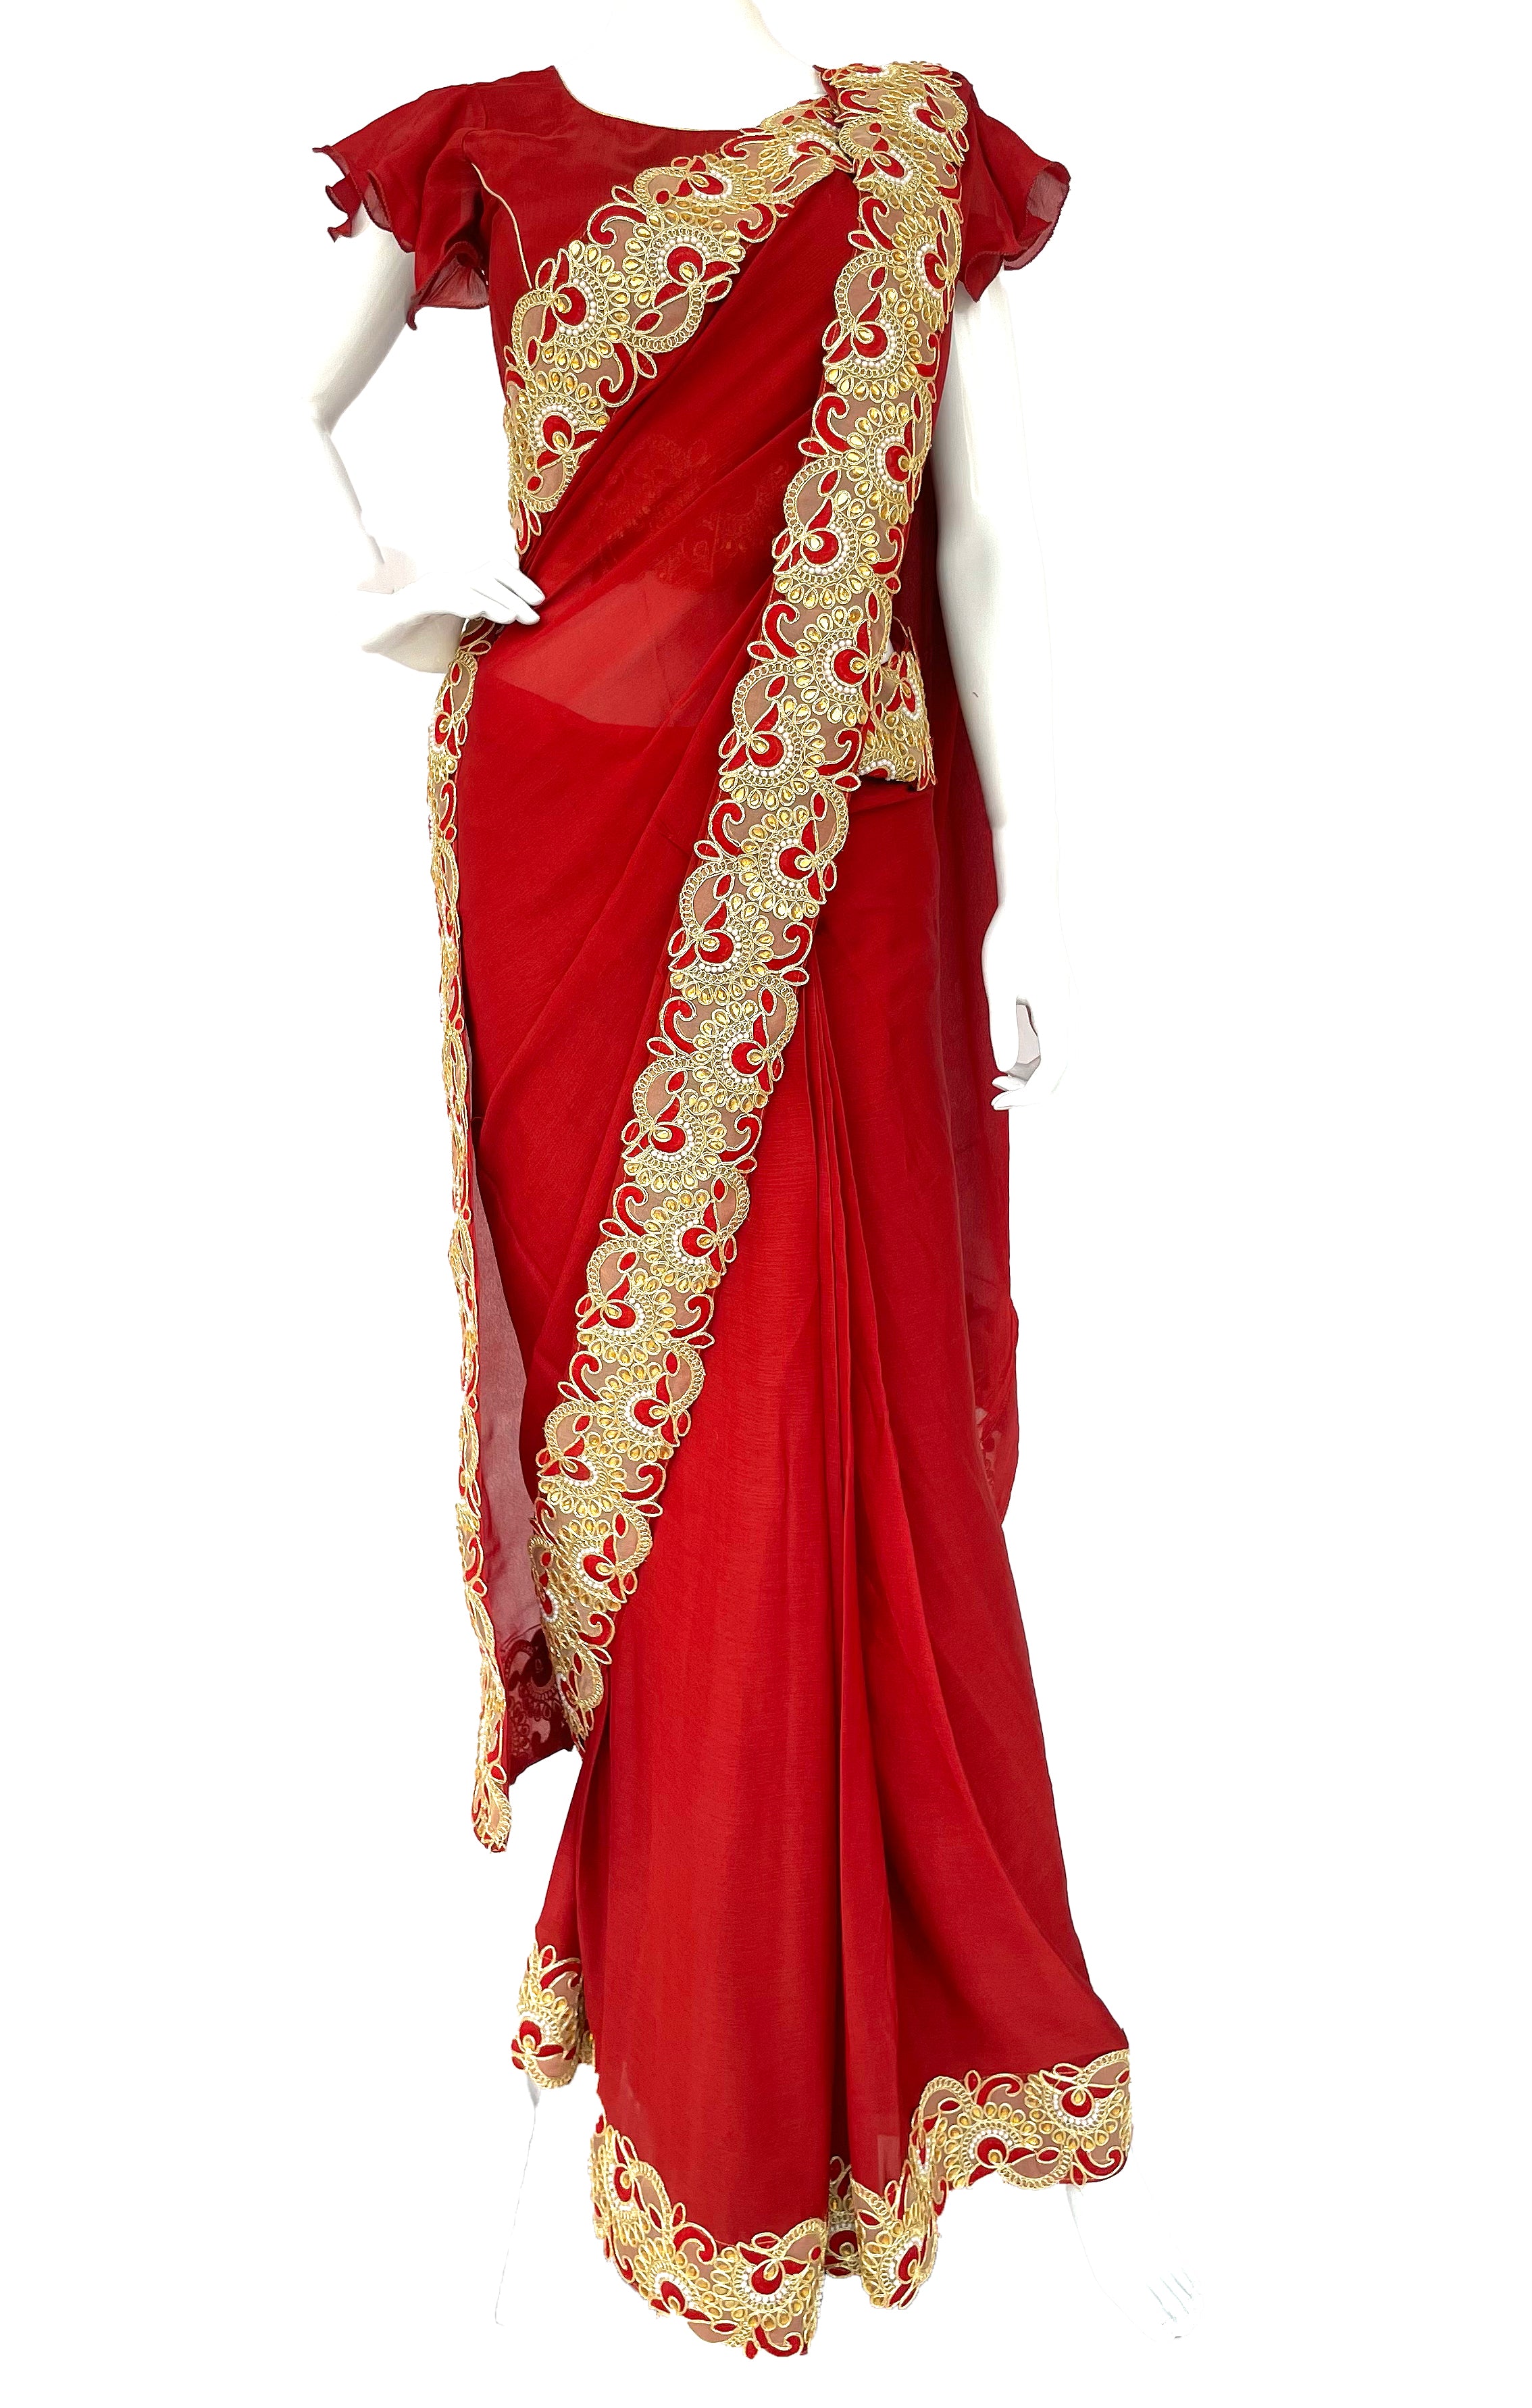 Faux Georgette Party Wear Saree in Red and Maroon with Stone work |  Designer saree blouse patterns, Wedding saree indian, Red saree wedding